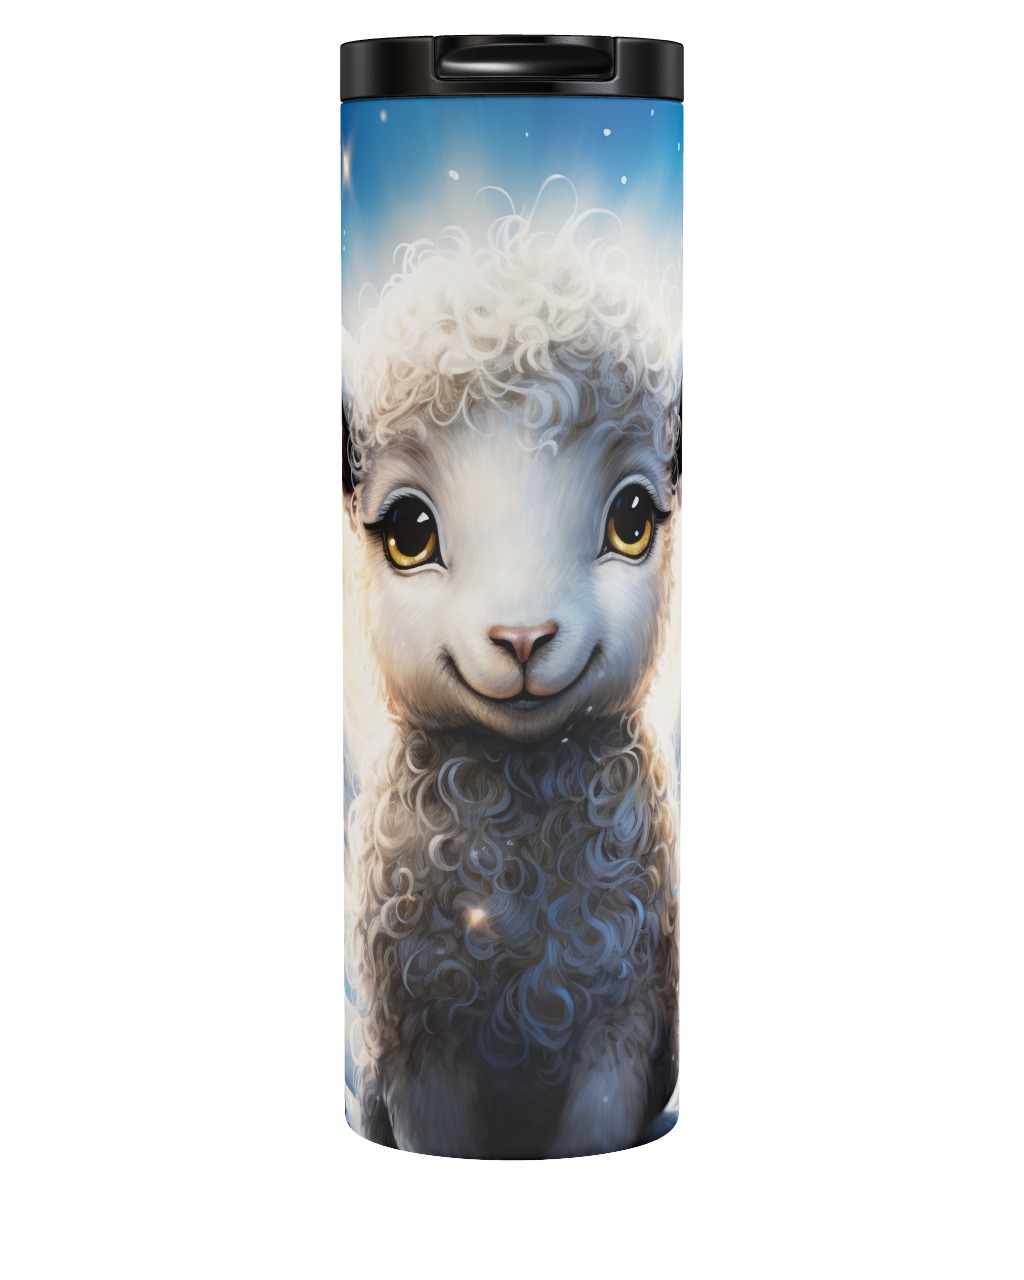 Sheep In The Snow Tumbler